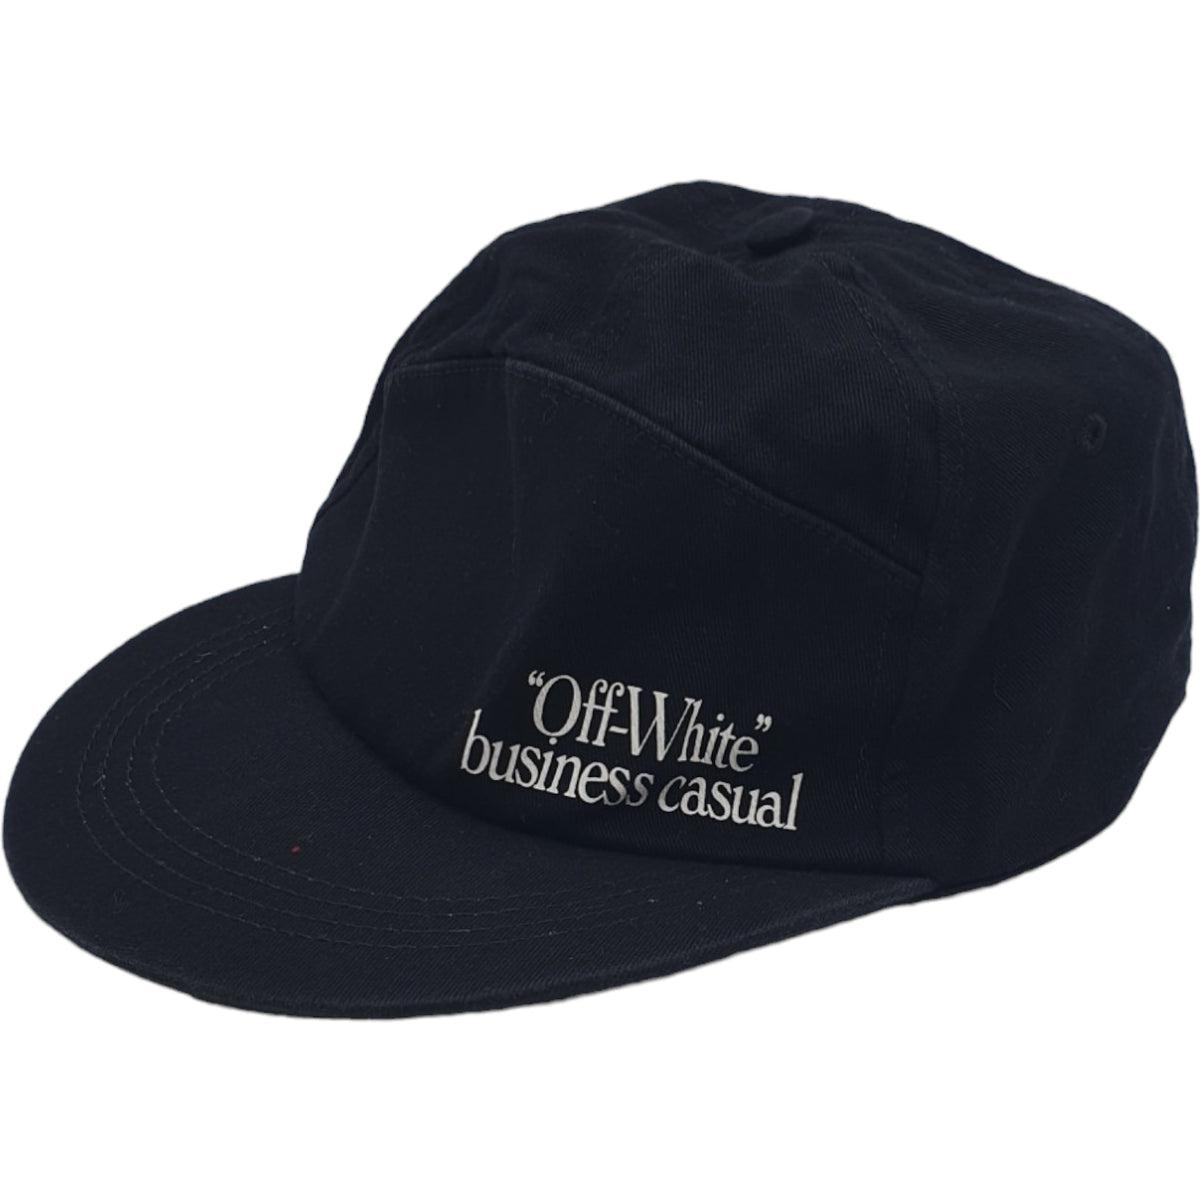 Off-White Black 5 Panel Business Casual Cap